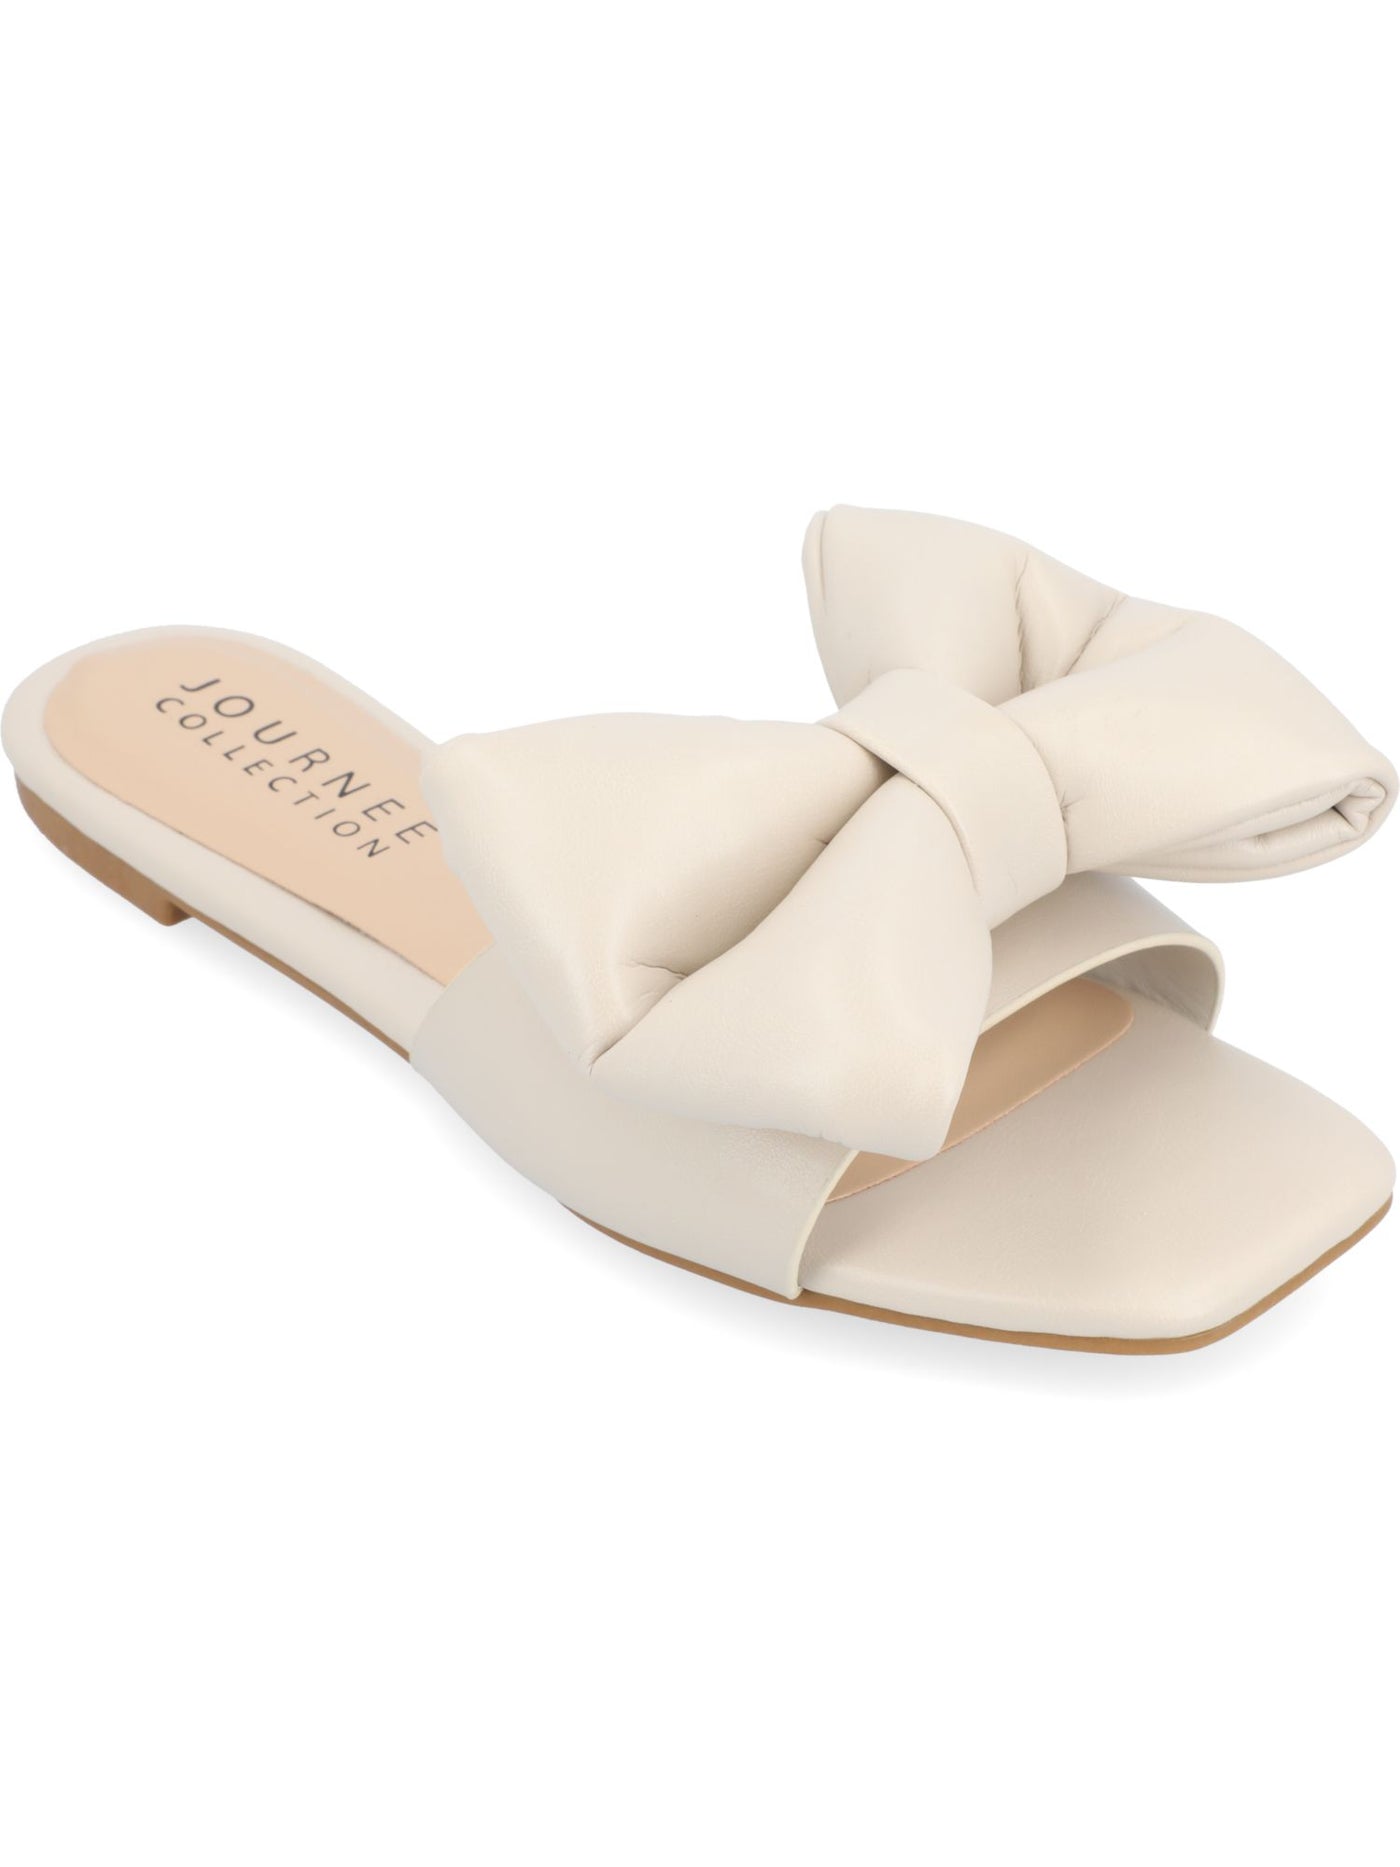 JOURNEE COLLECTION Womens Beige Cushioned Bow Accent Goring Fayre Square Toe Slip On Slide Sandals Shoes 9.5